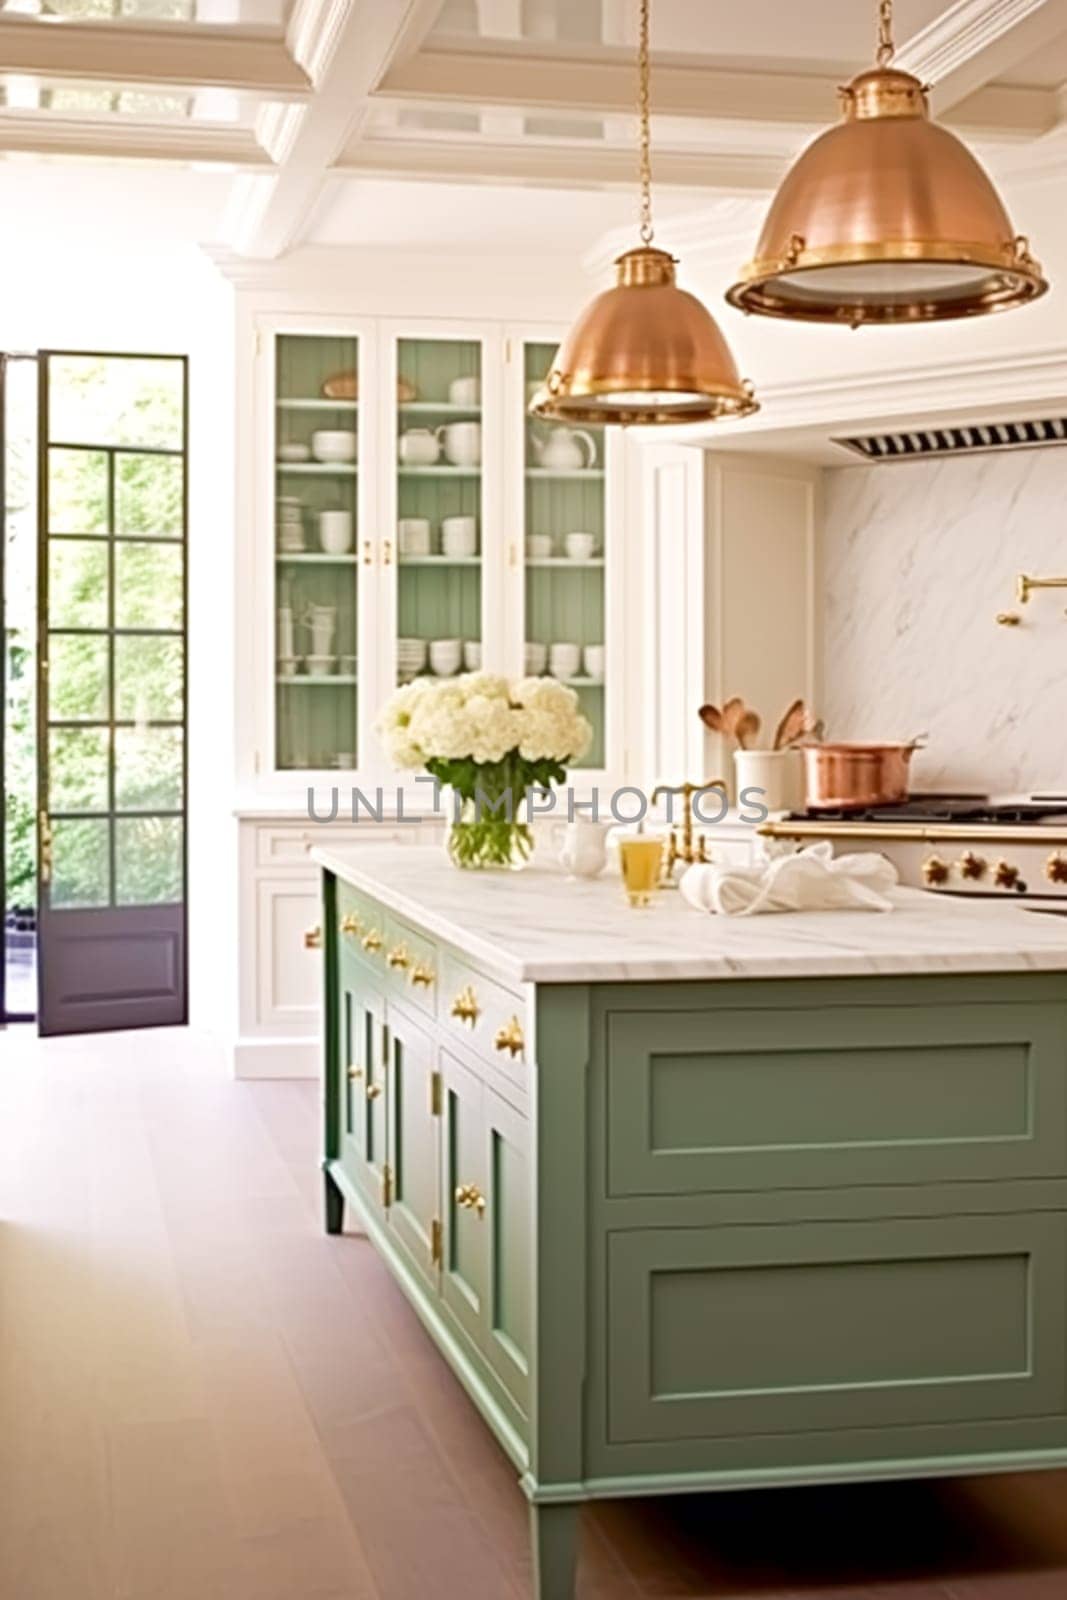 Kitchen decor, interior design and house improvement, bespoke sage green English in frame kitchen cabinets, countertop and appliance in a country house, elegant cottage style idea